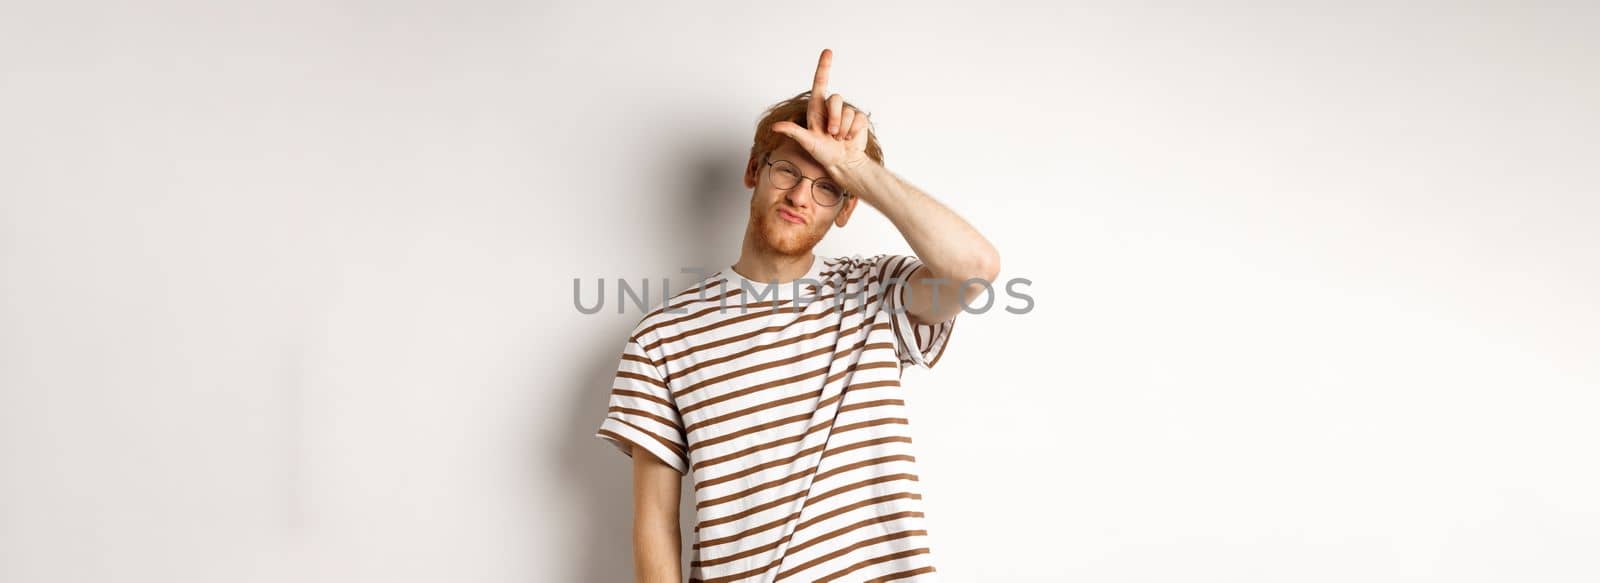 Sassy and arrogant redhead man scolding lost team, showing loser gesture on forehead and making smug face, standing over white background.